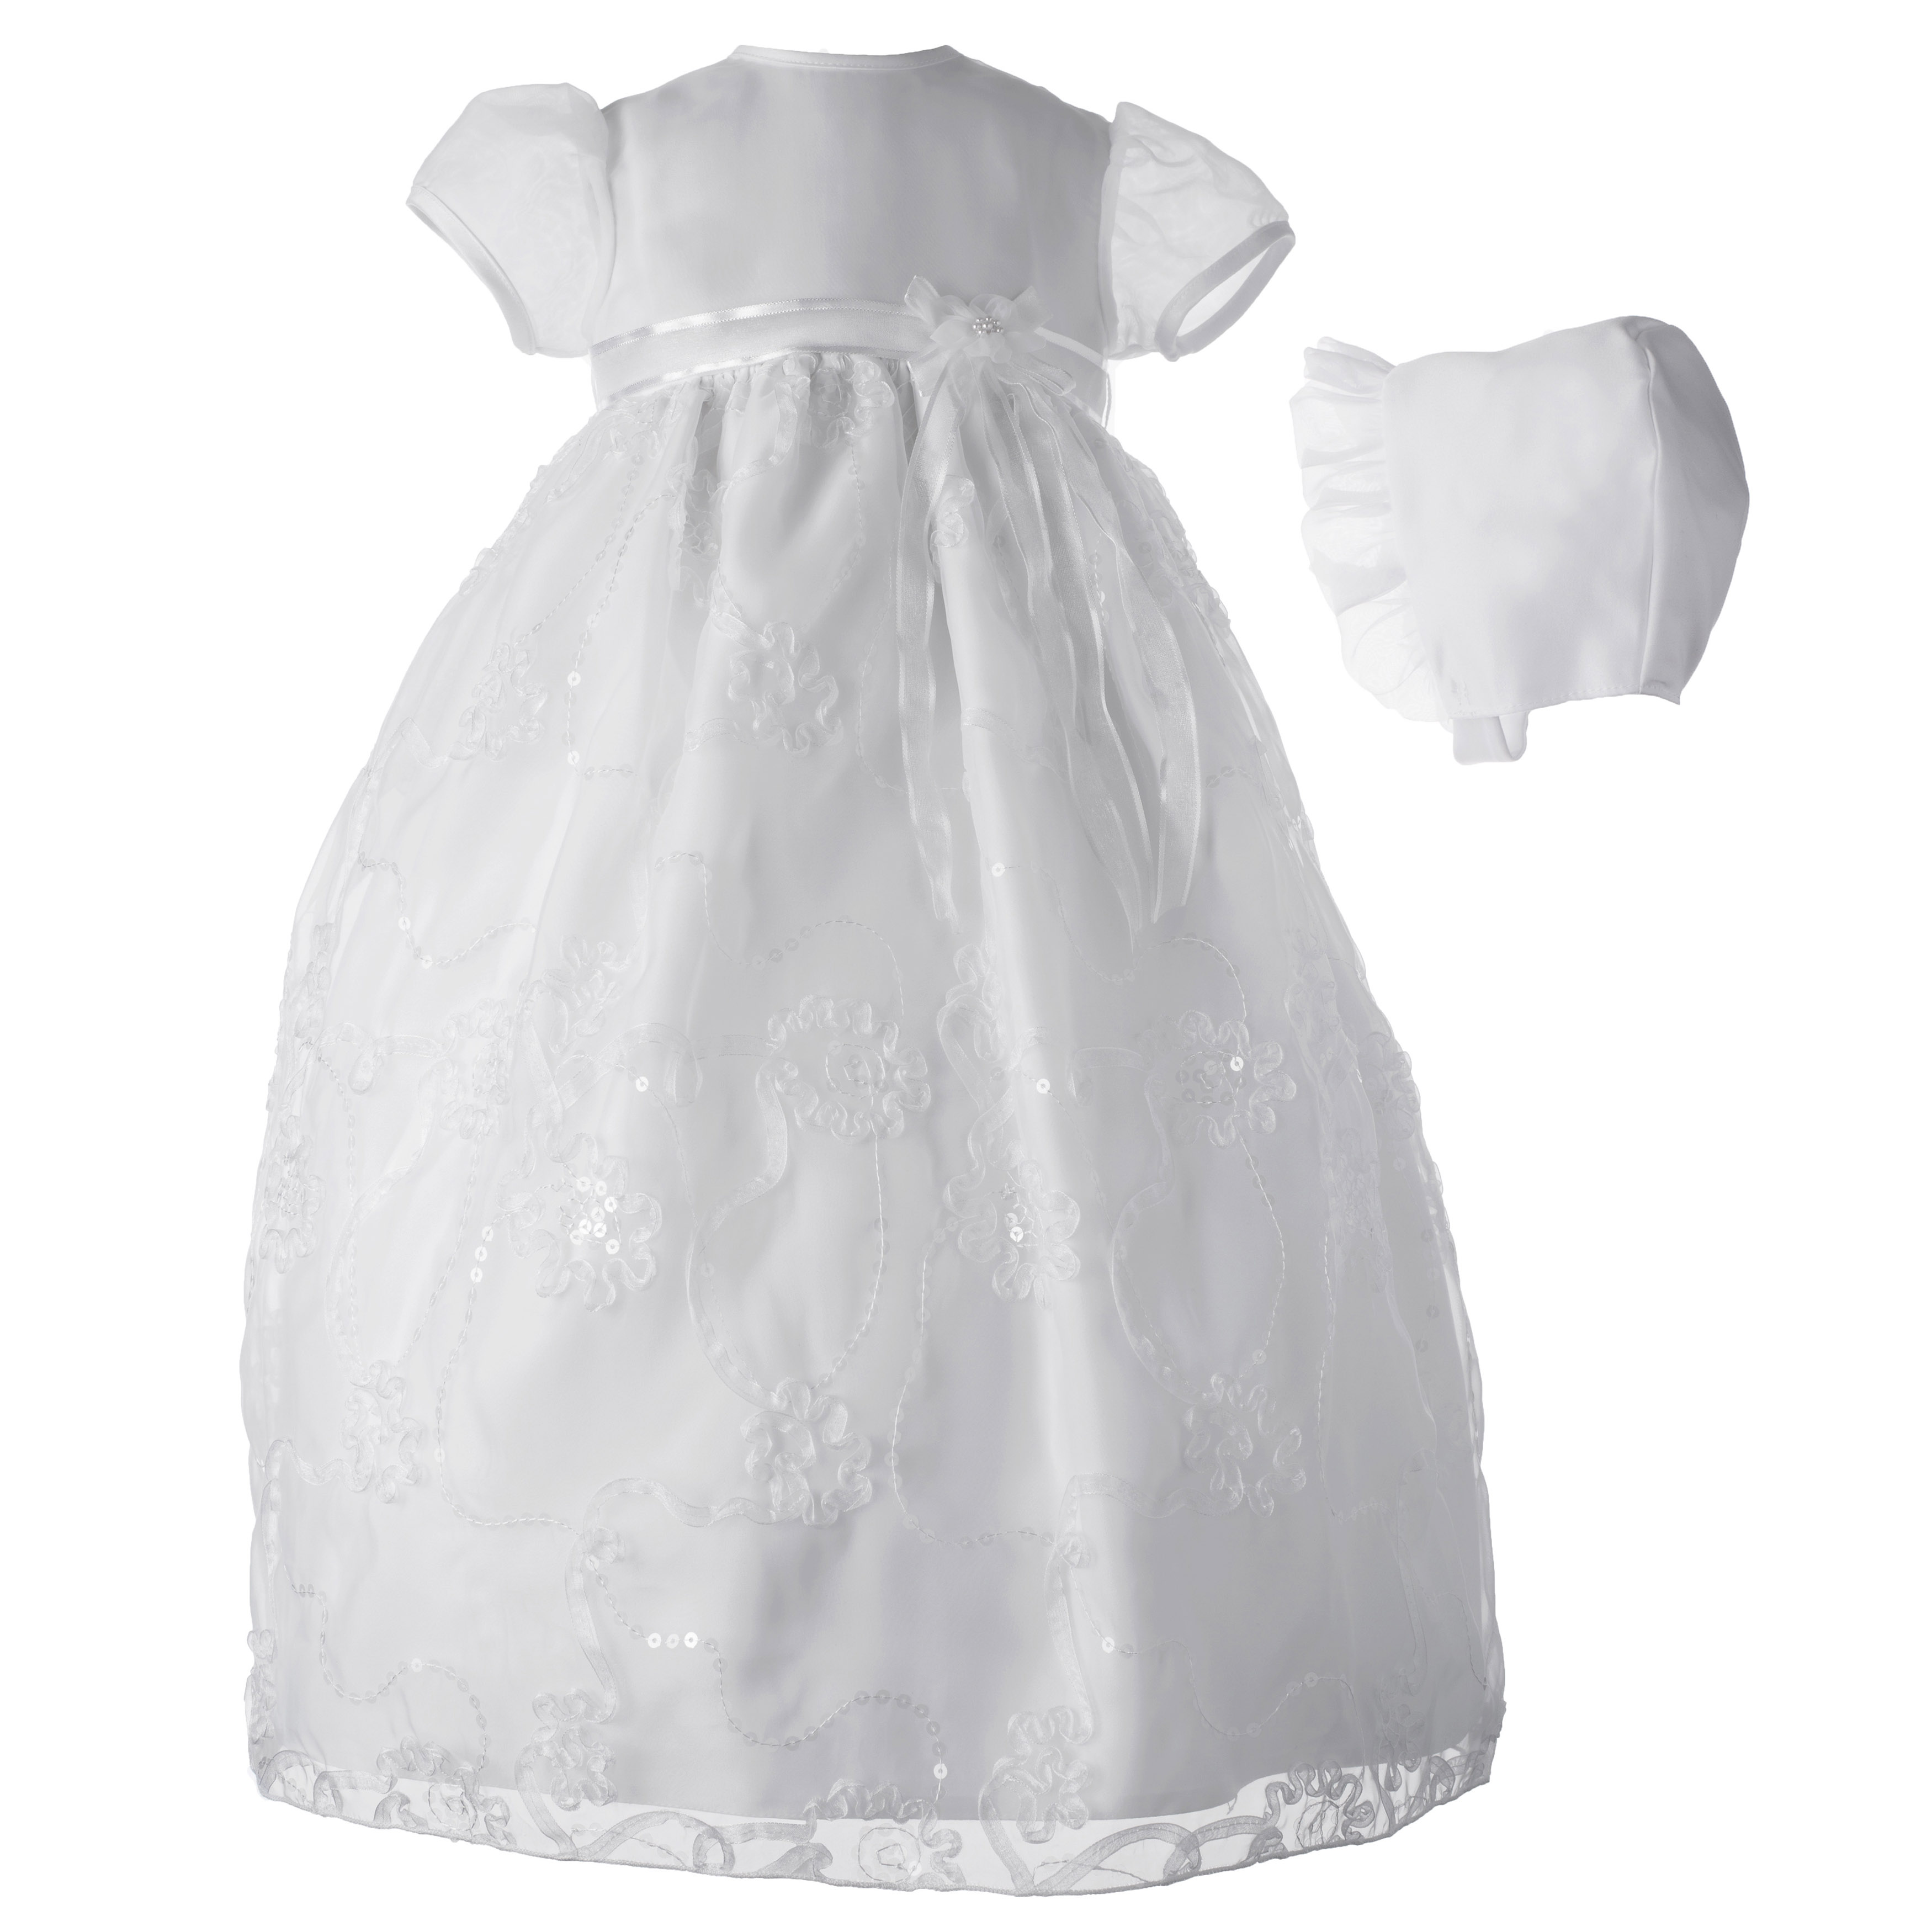 MaDonna Infant's White Christening Gown and Bonnet